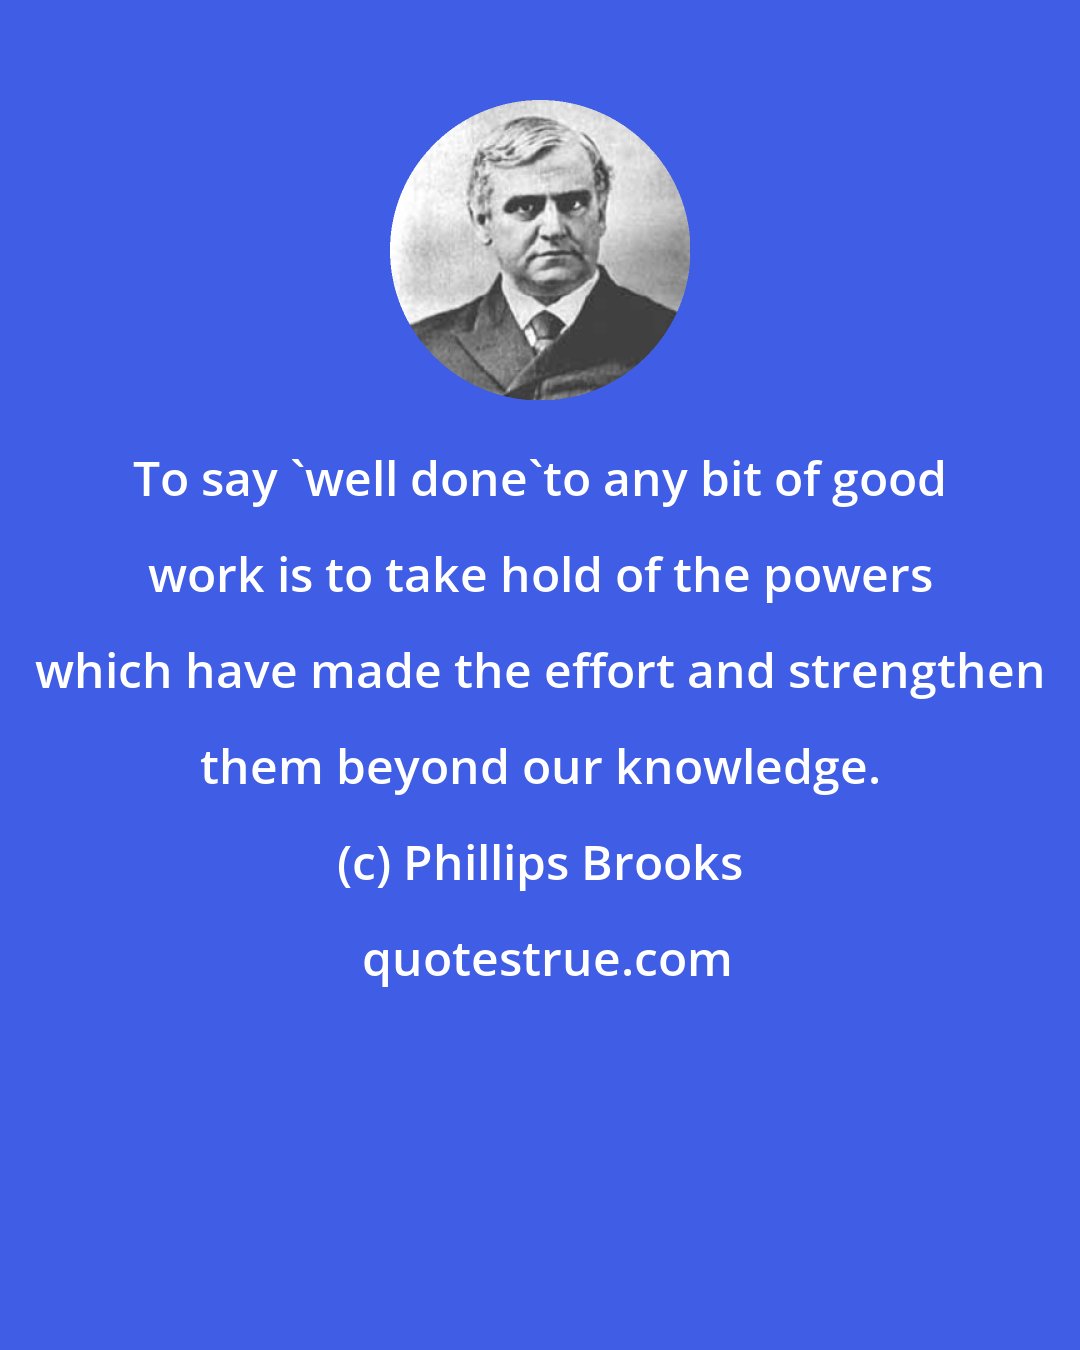 Phillips Brooks: To say 'well done'to any bit of good work is to take hold of the powers which have made the effort and strengthen them beyond our knowledge.